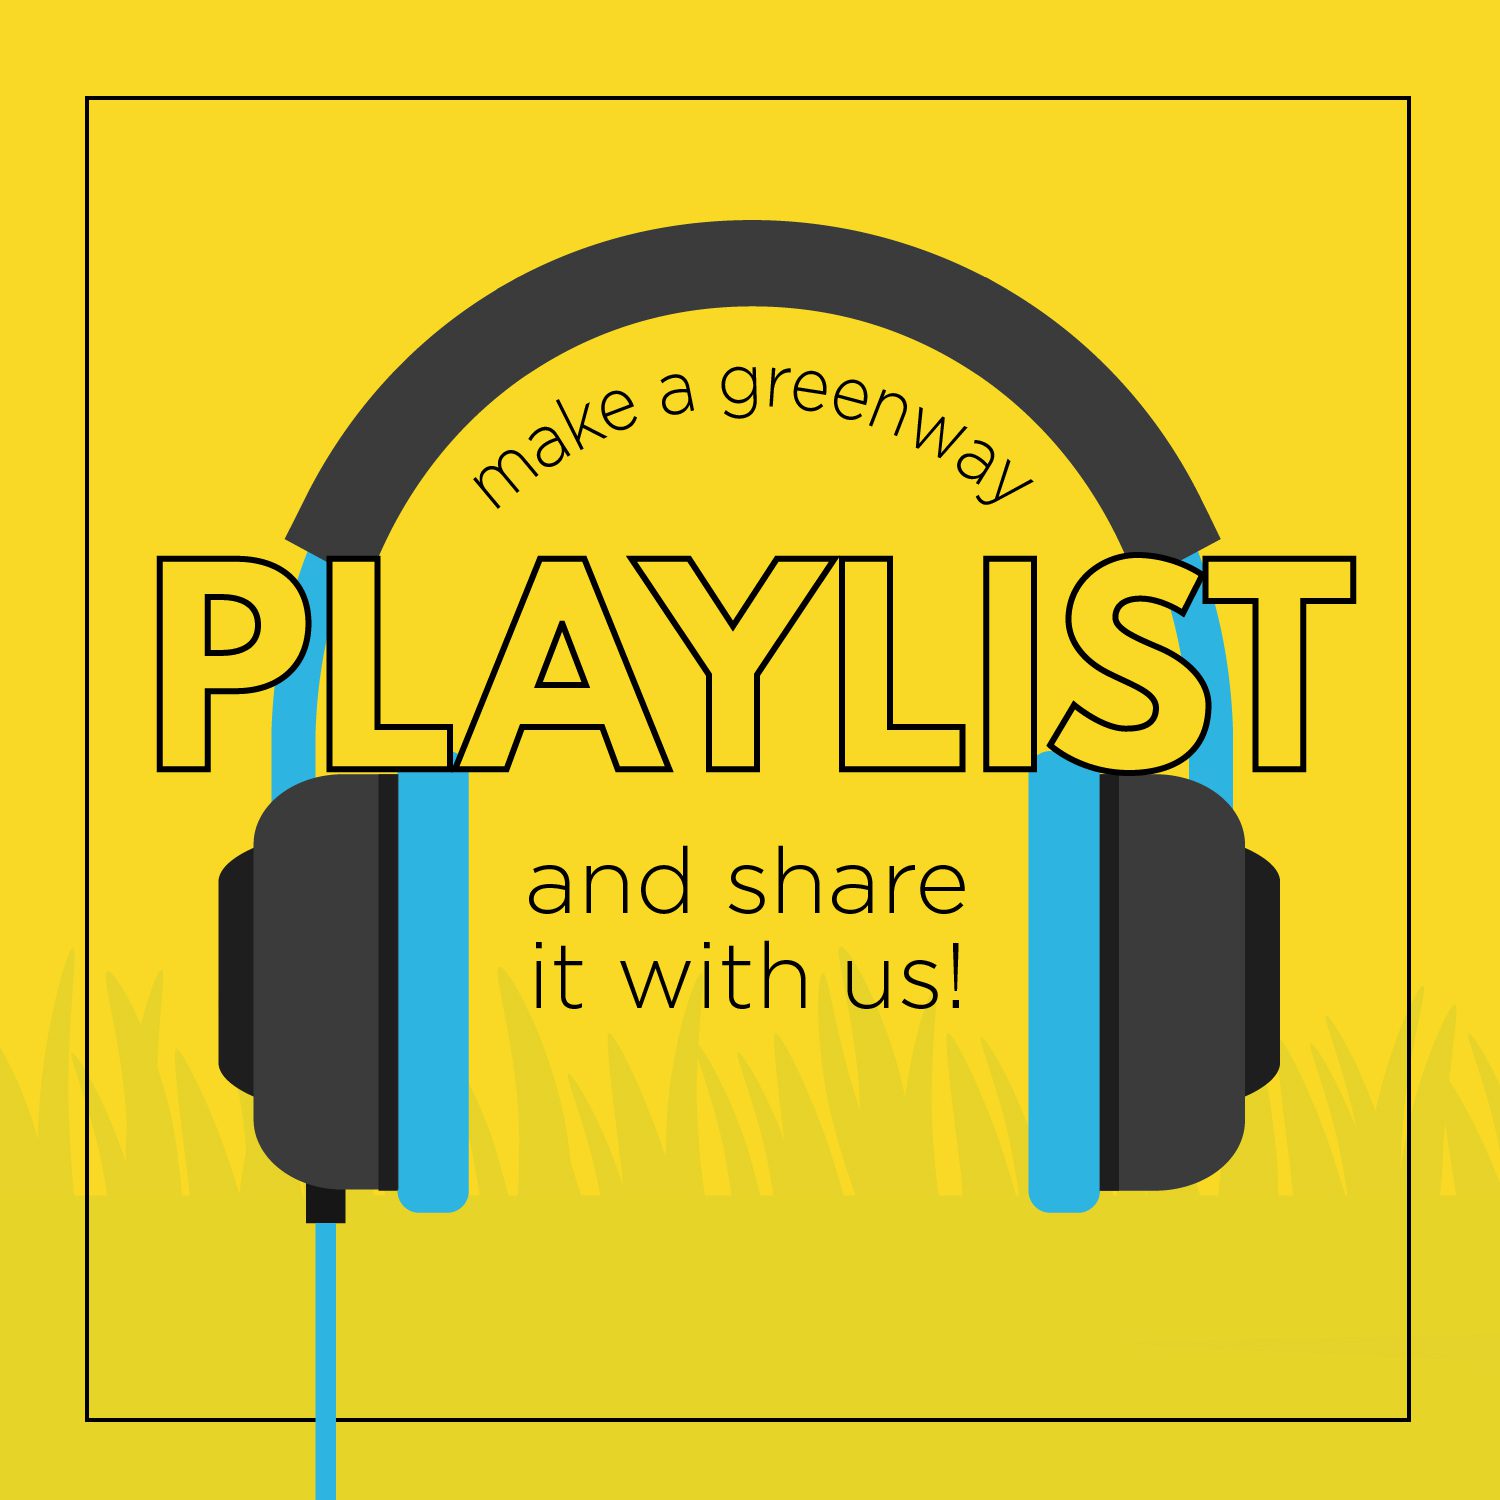 Make a greenway playlist and share it with us!